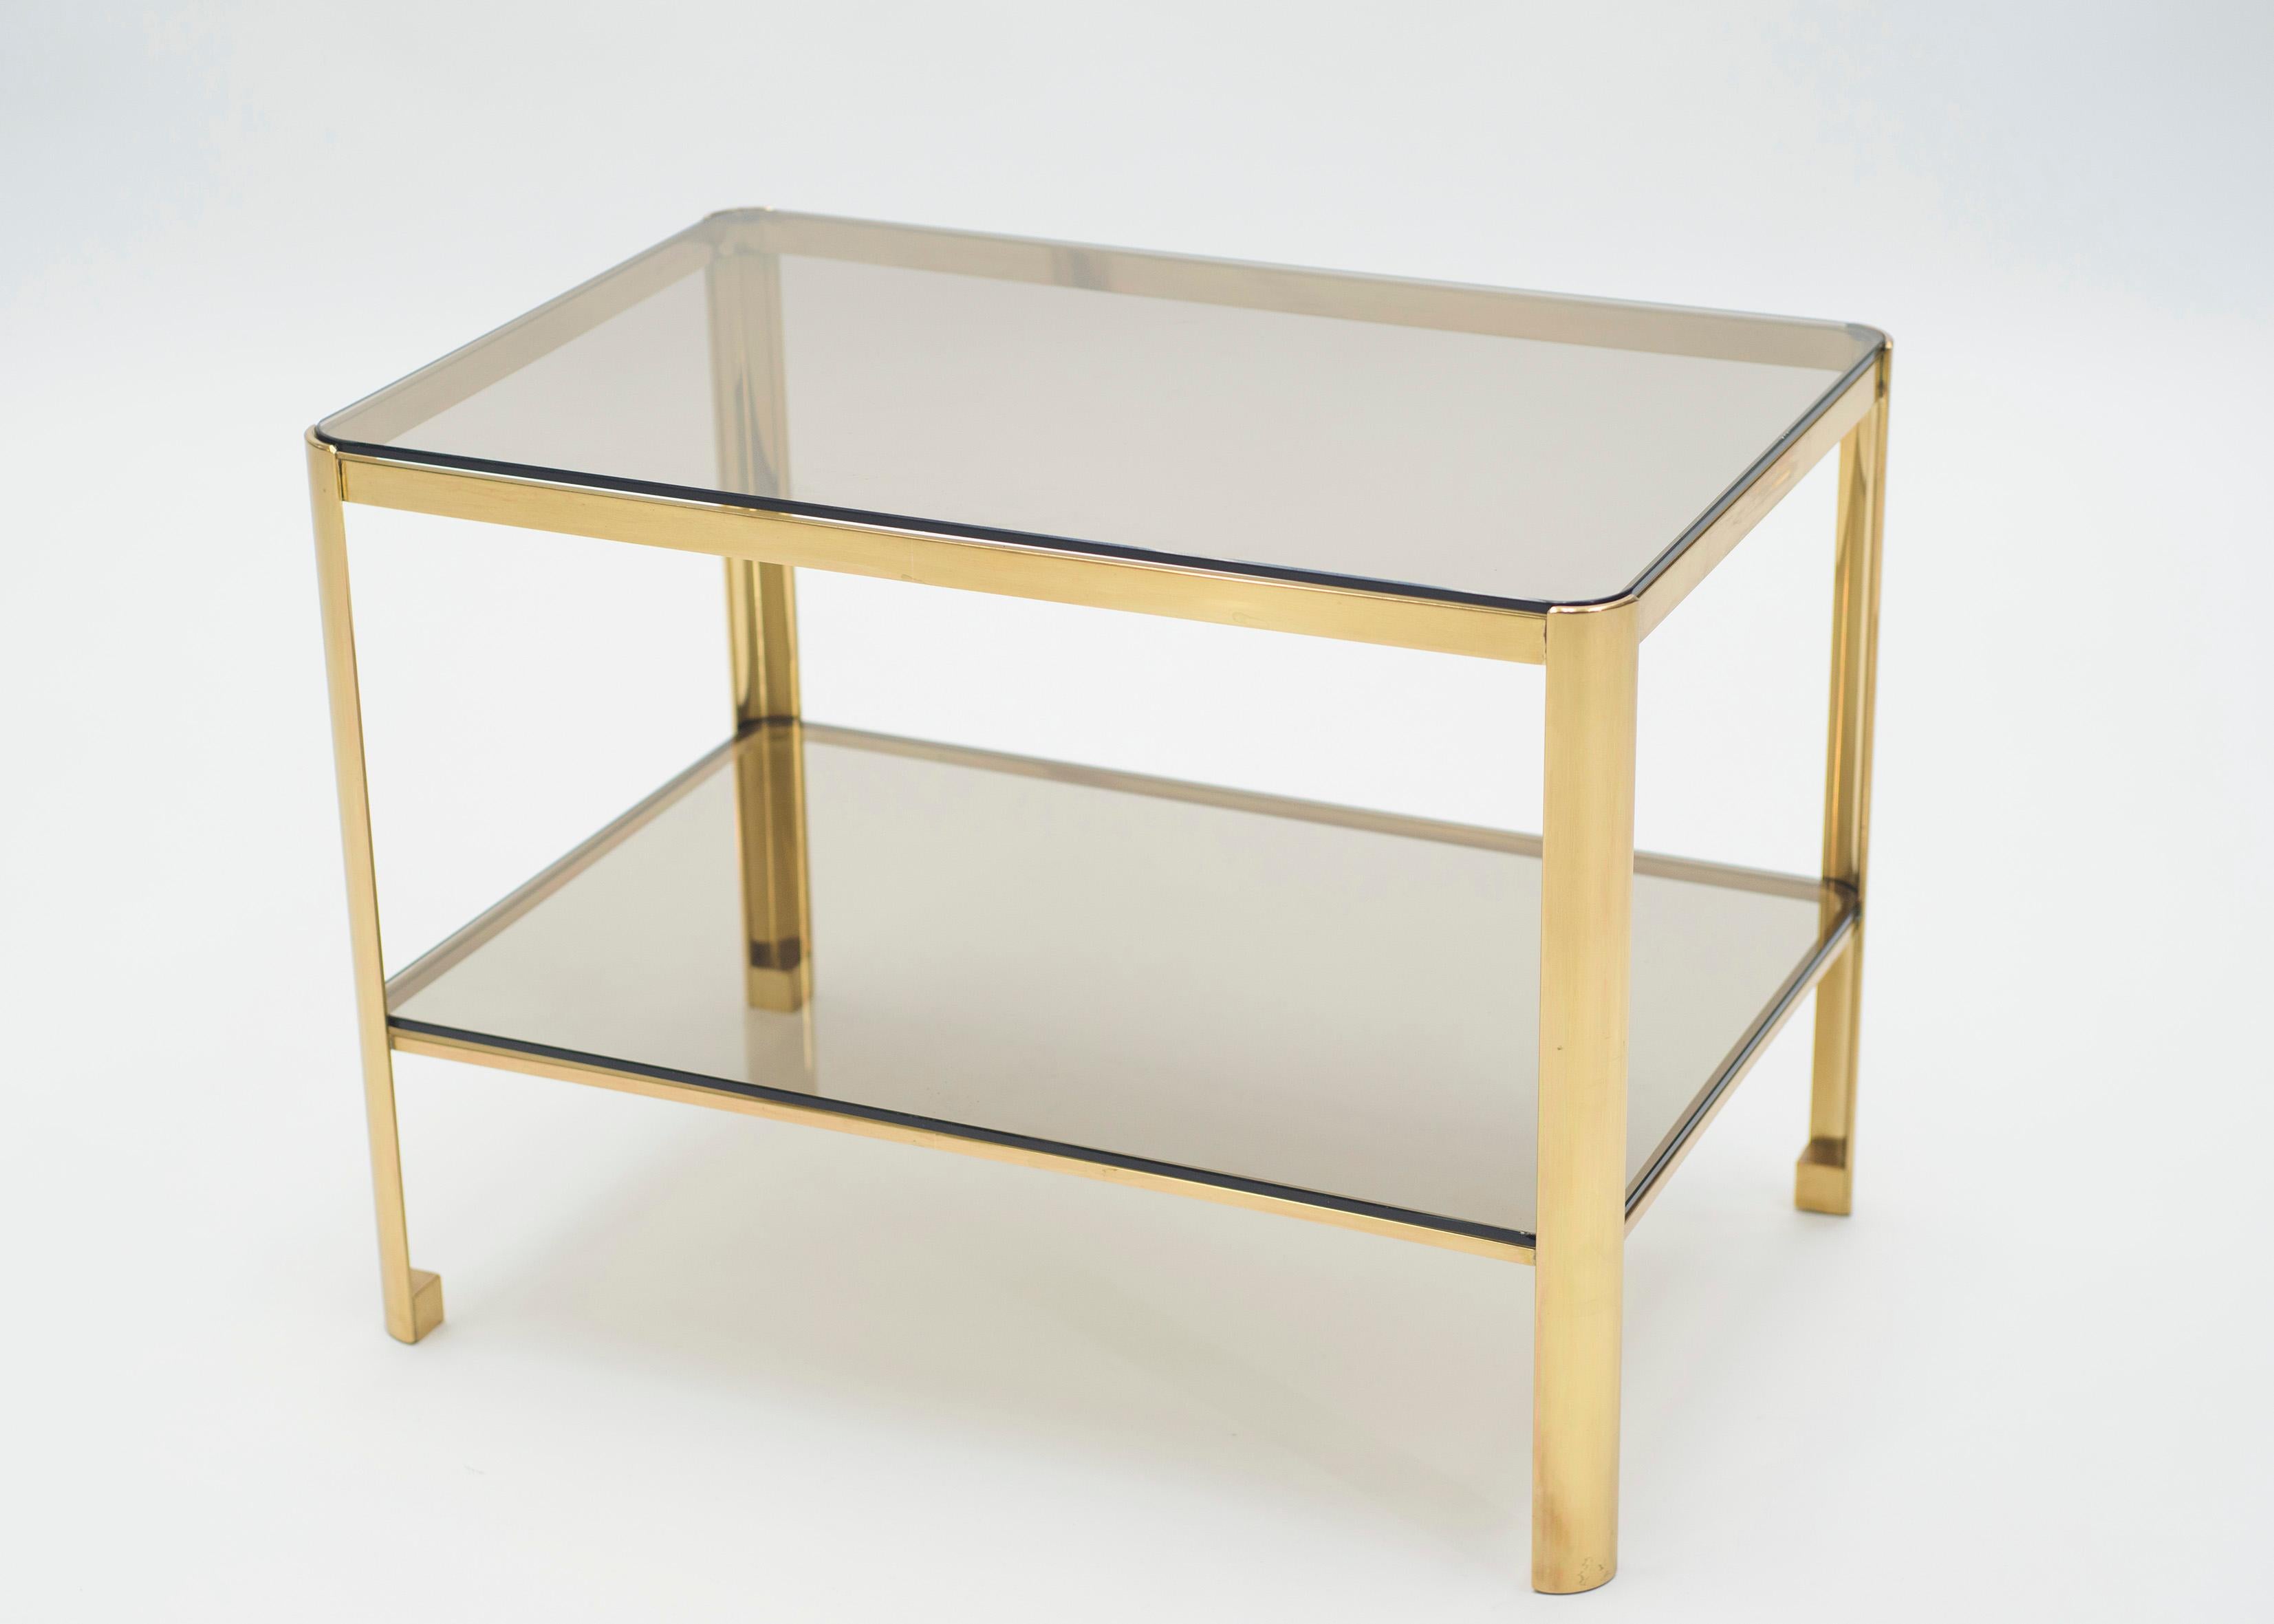 This occasional and side table signed by Jacques Quinet and stamped by Broncz, is a remarkable find. It features a strong, bronze base constructed to last. The 2/3 glass top adds extra storage space as well as aesthetic appeal. This end table will